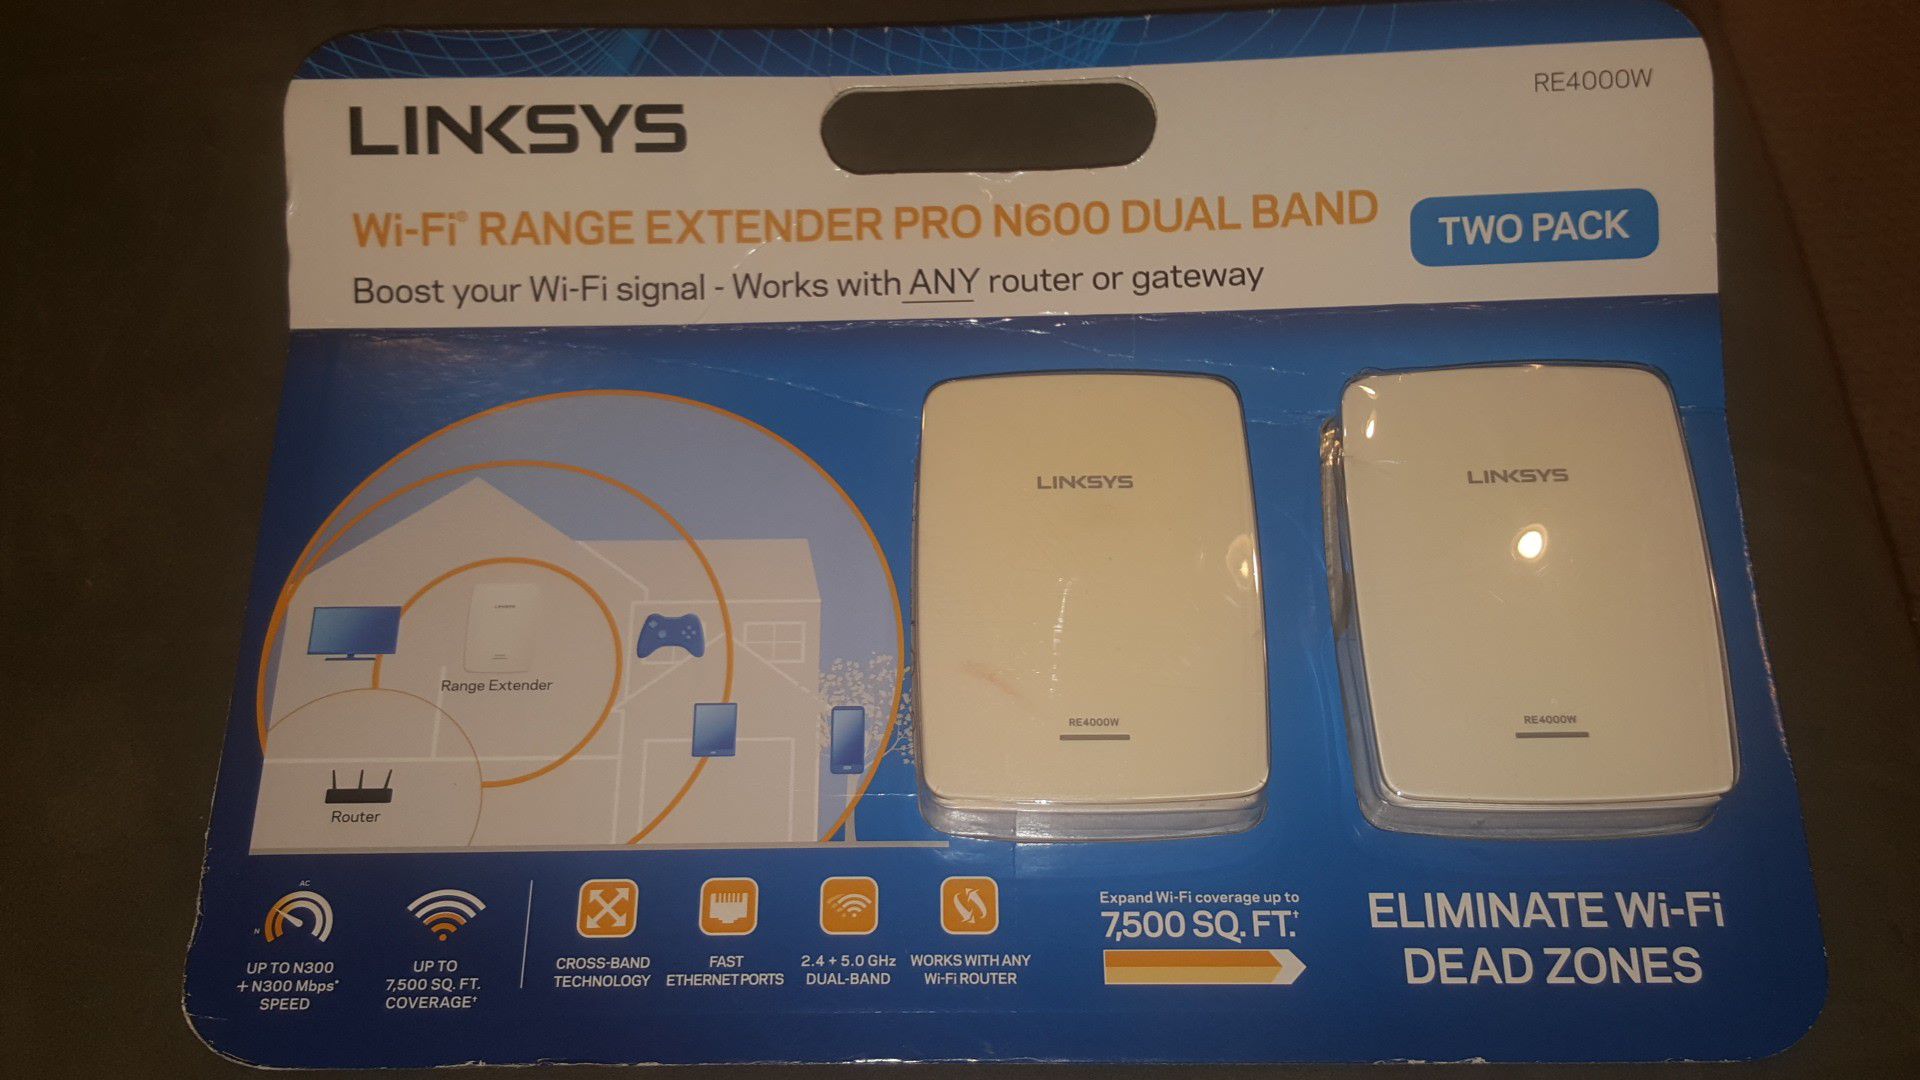 Linksys RE4000W 2 pack